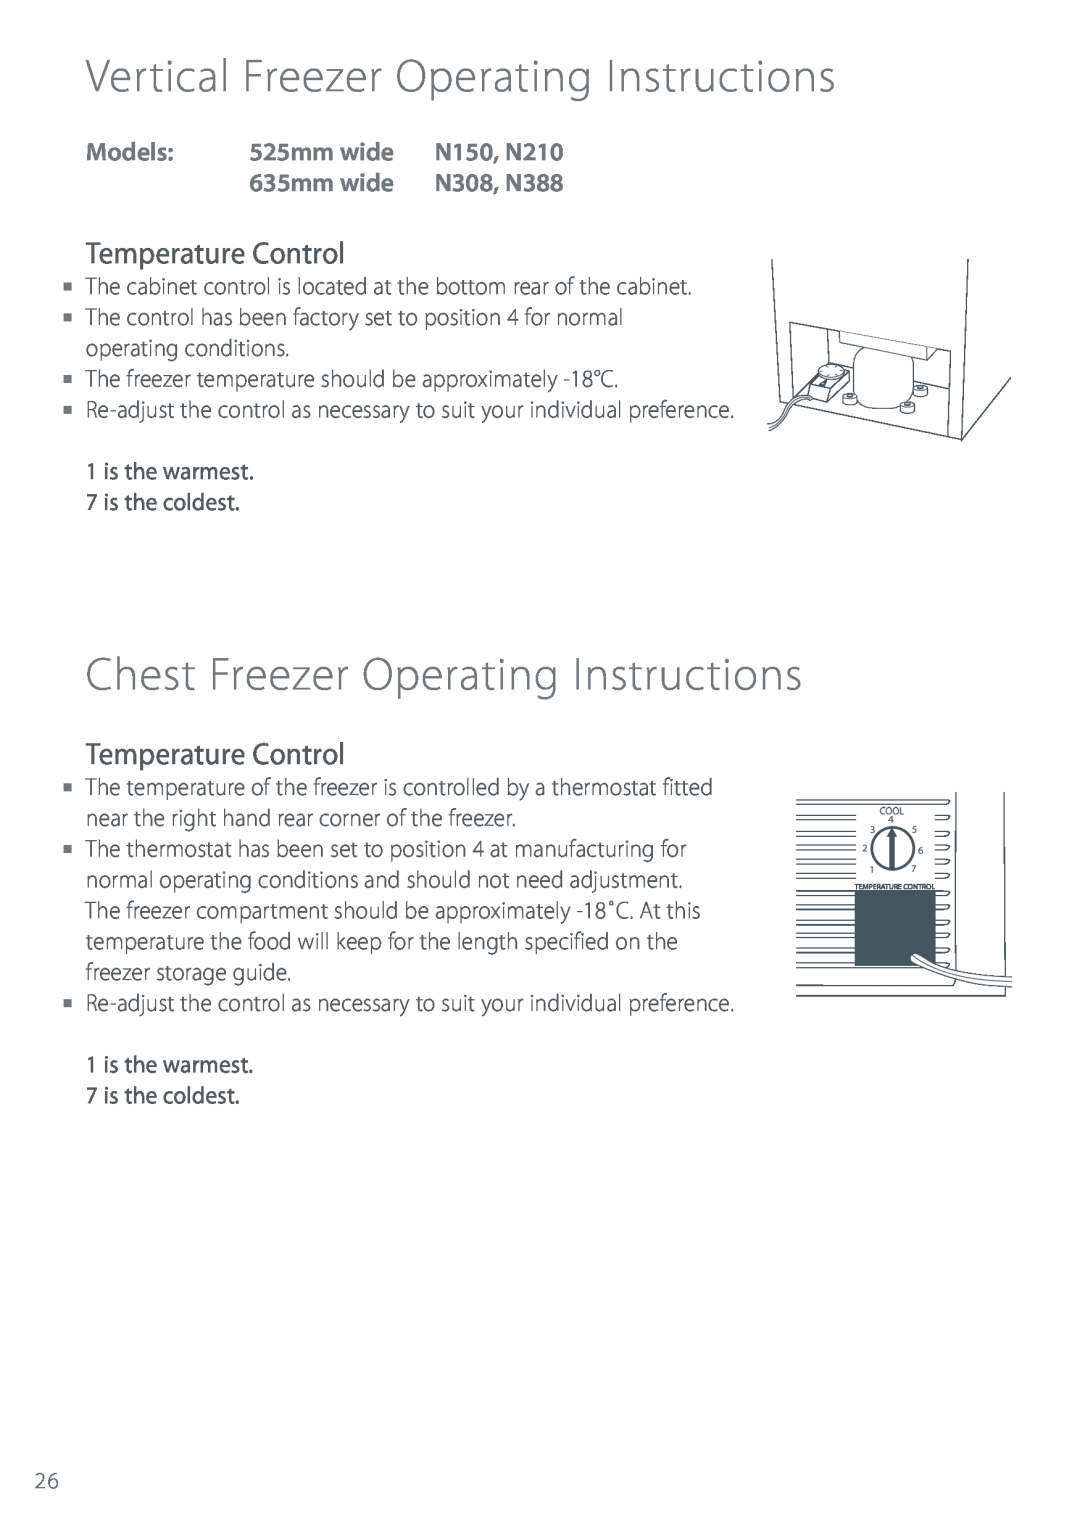 Fisher & Paykel Refrigerator & Freezer manual Vertical Freezer Operating Instructions, Chest Freezer Operating Instructions 